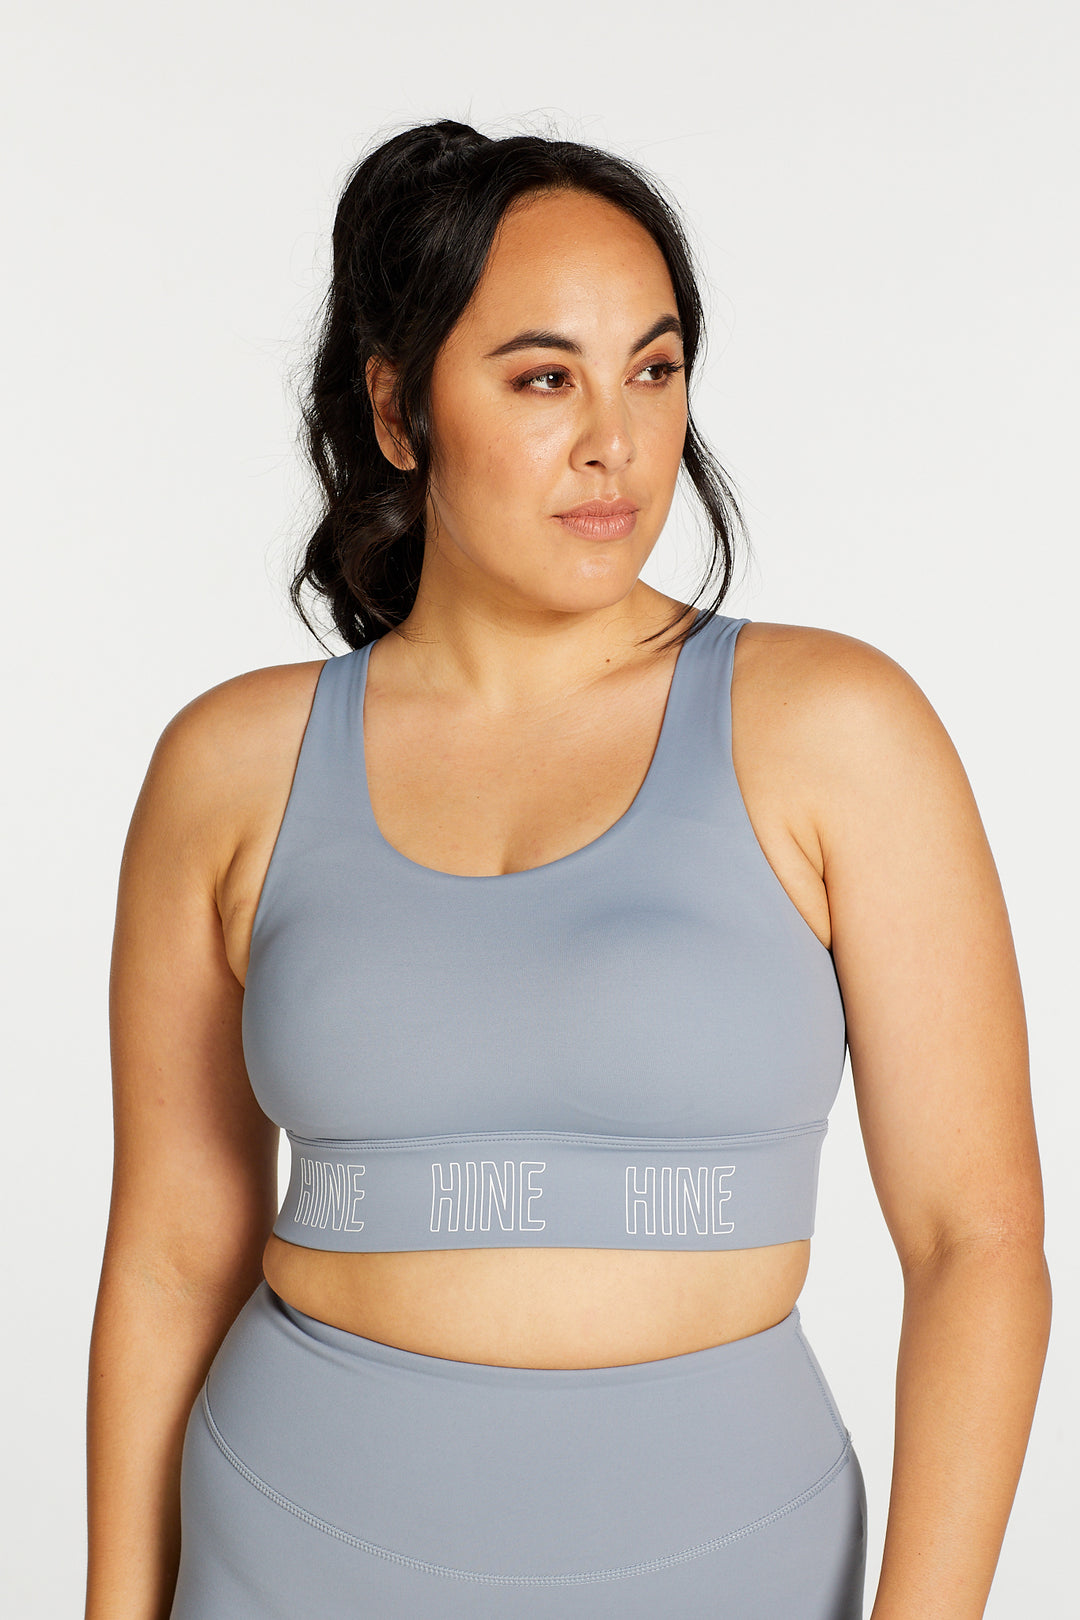 Sports Bra Range - Recovery Crop Top, Luxe, Zip Up & Intensity Options –  HINE COLLECTION